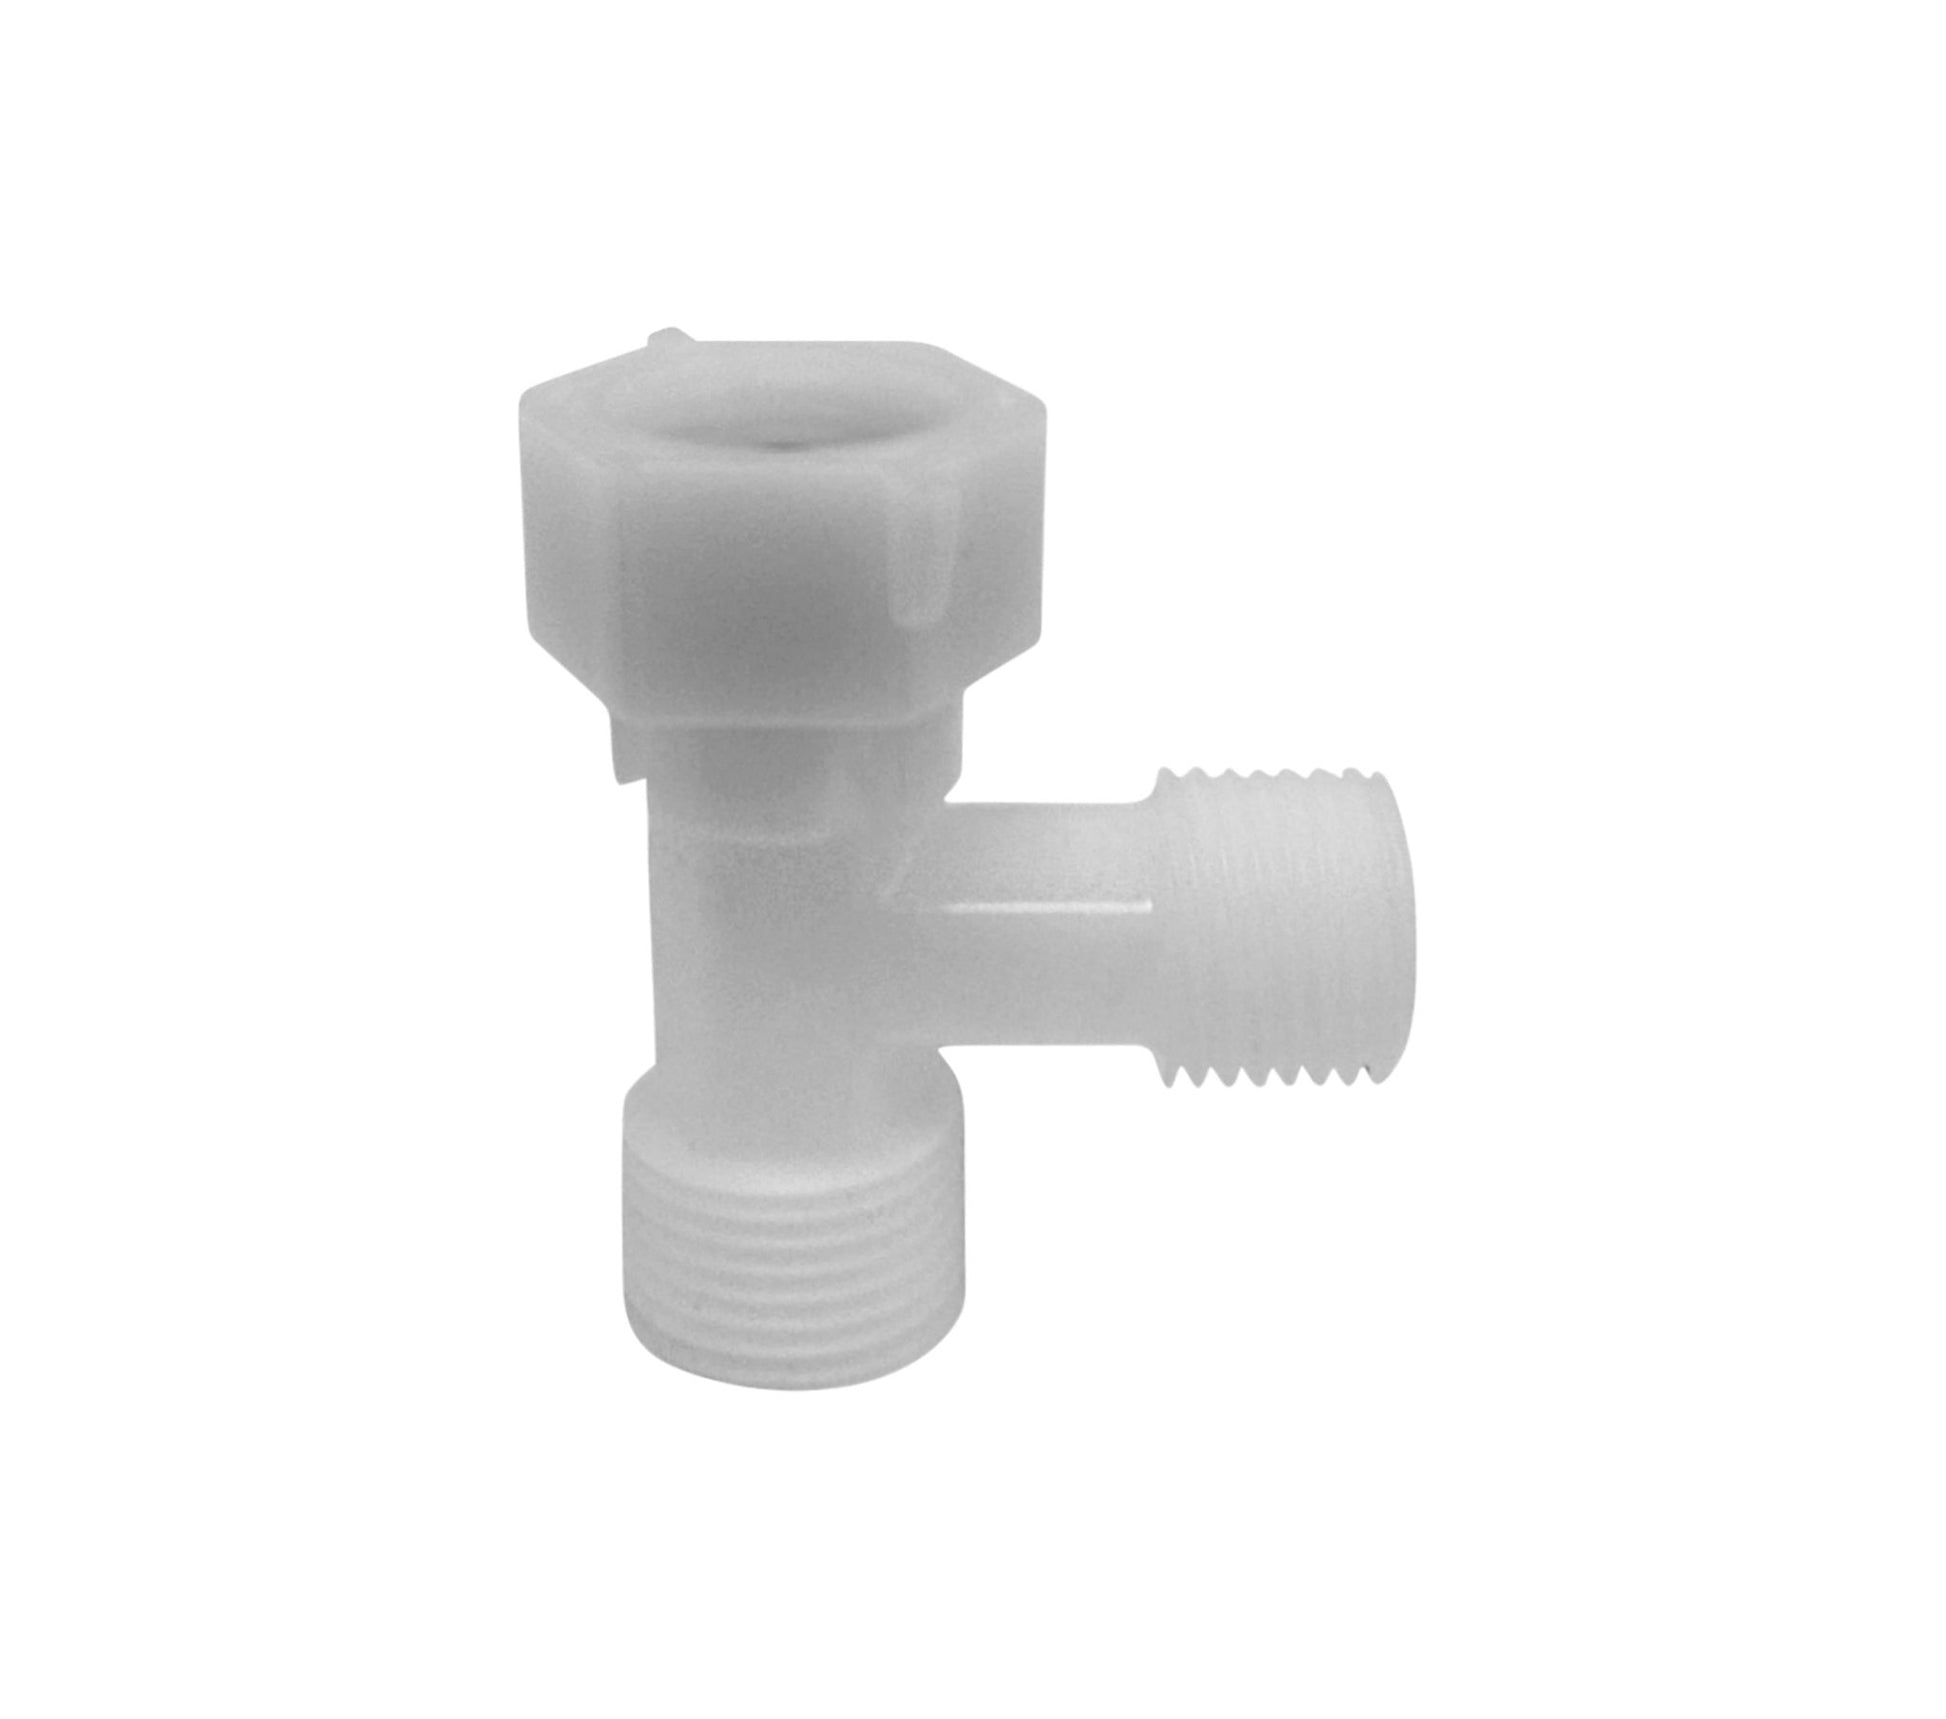 1/2" Cold Water Plastic T-Adapter, side view